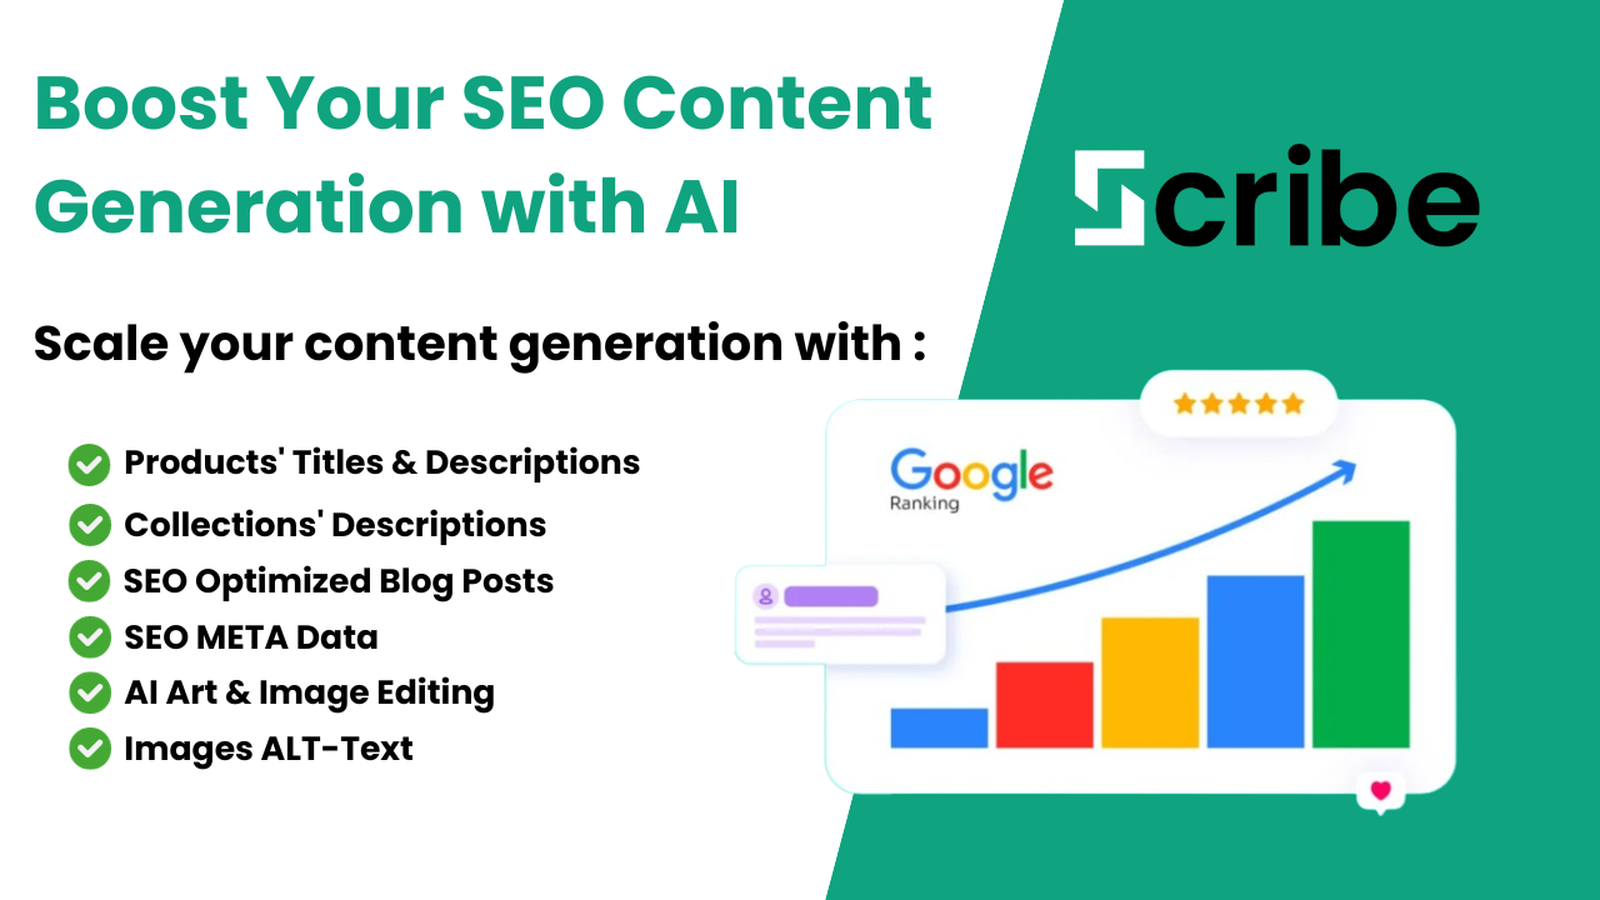 Boost your SEO content generation with AI